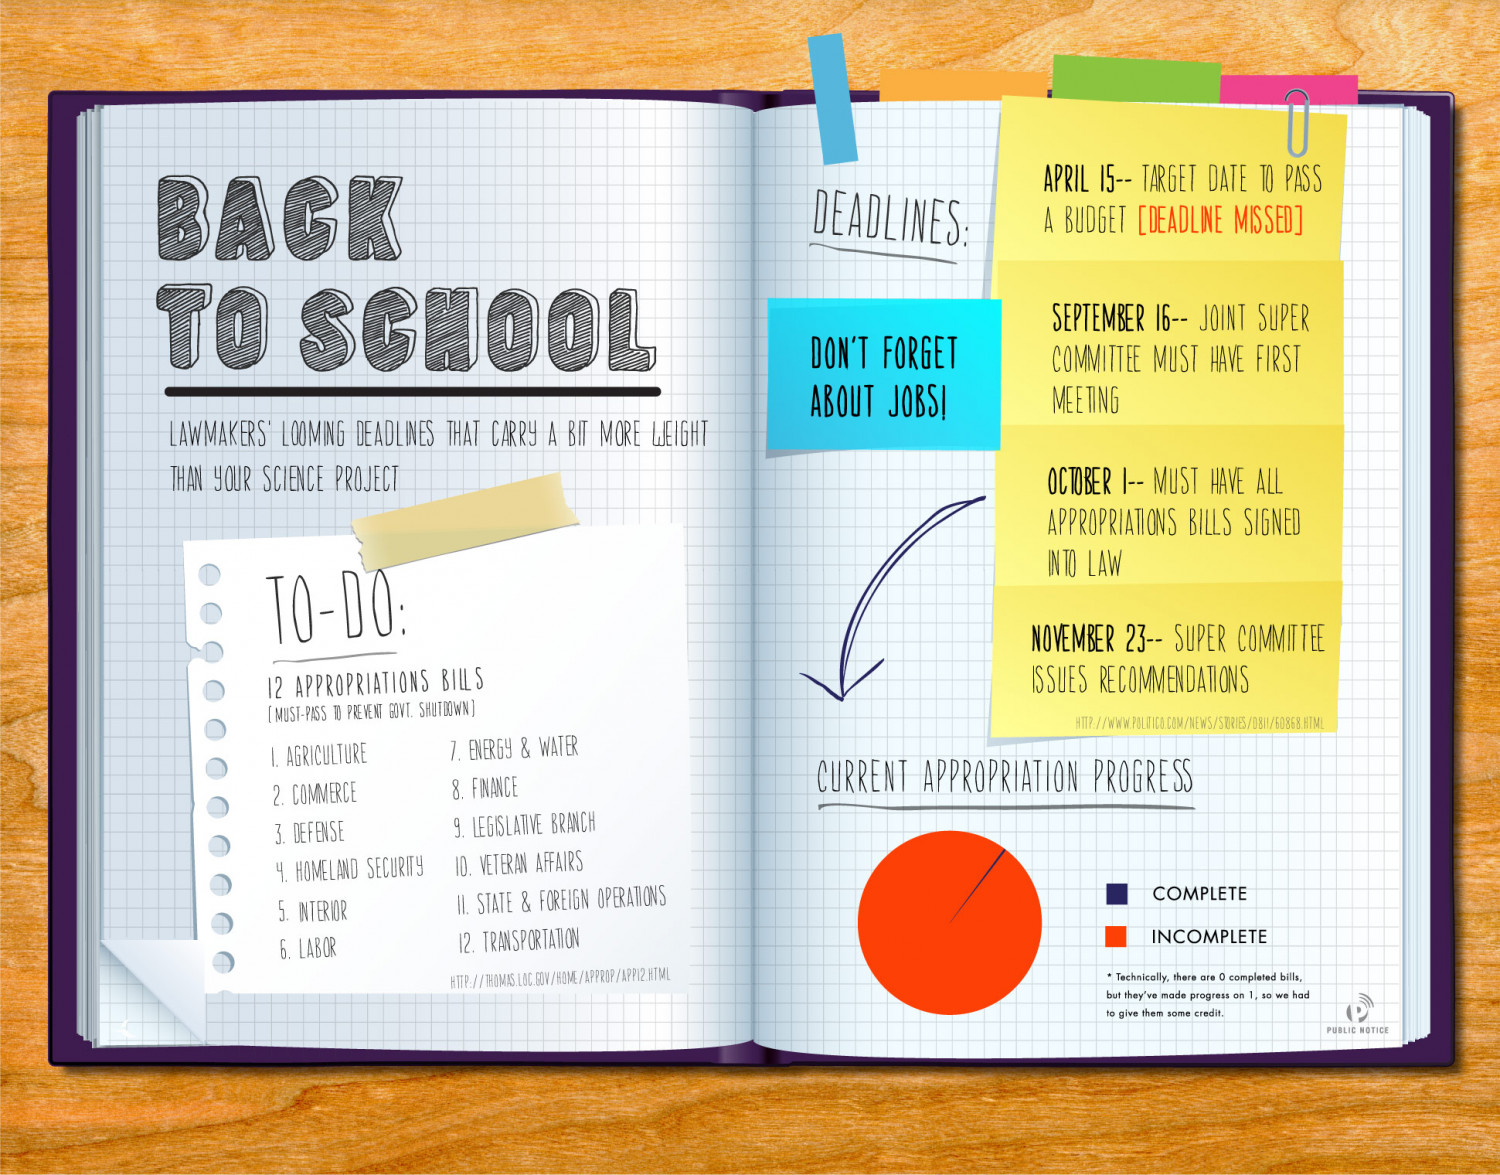 Back to School Infographic